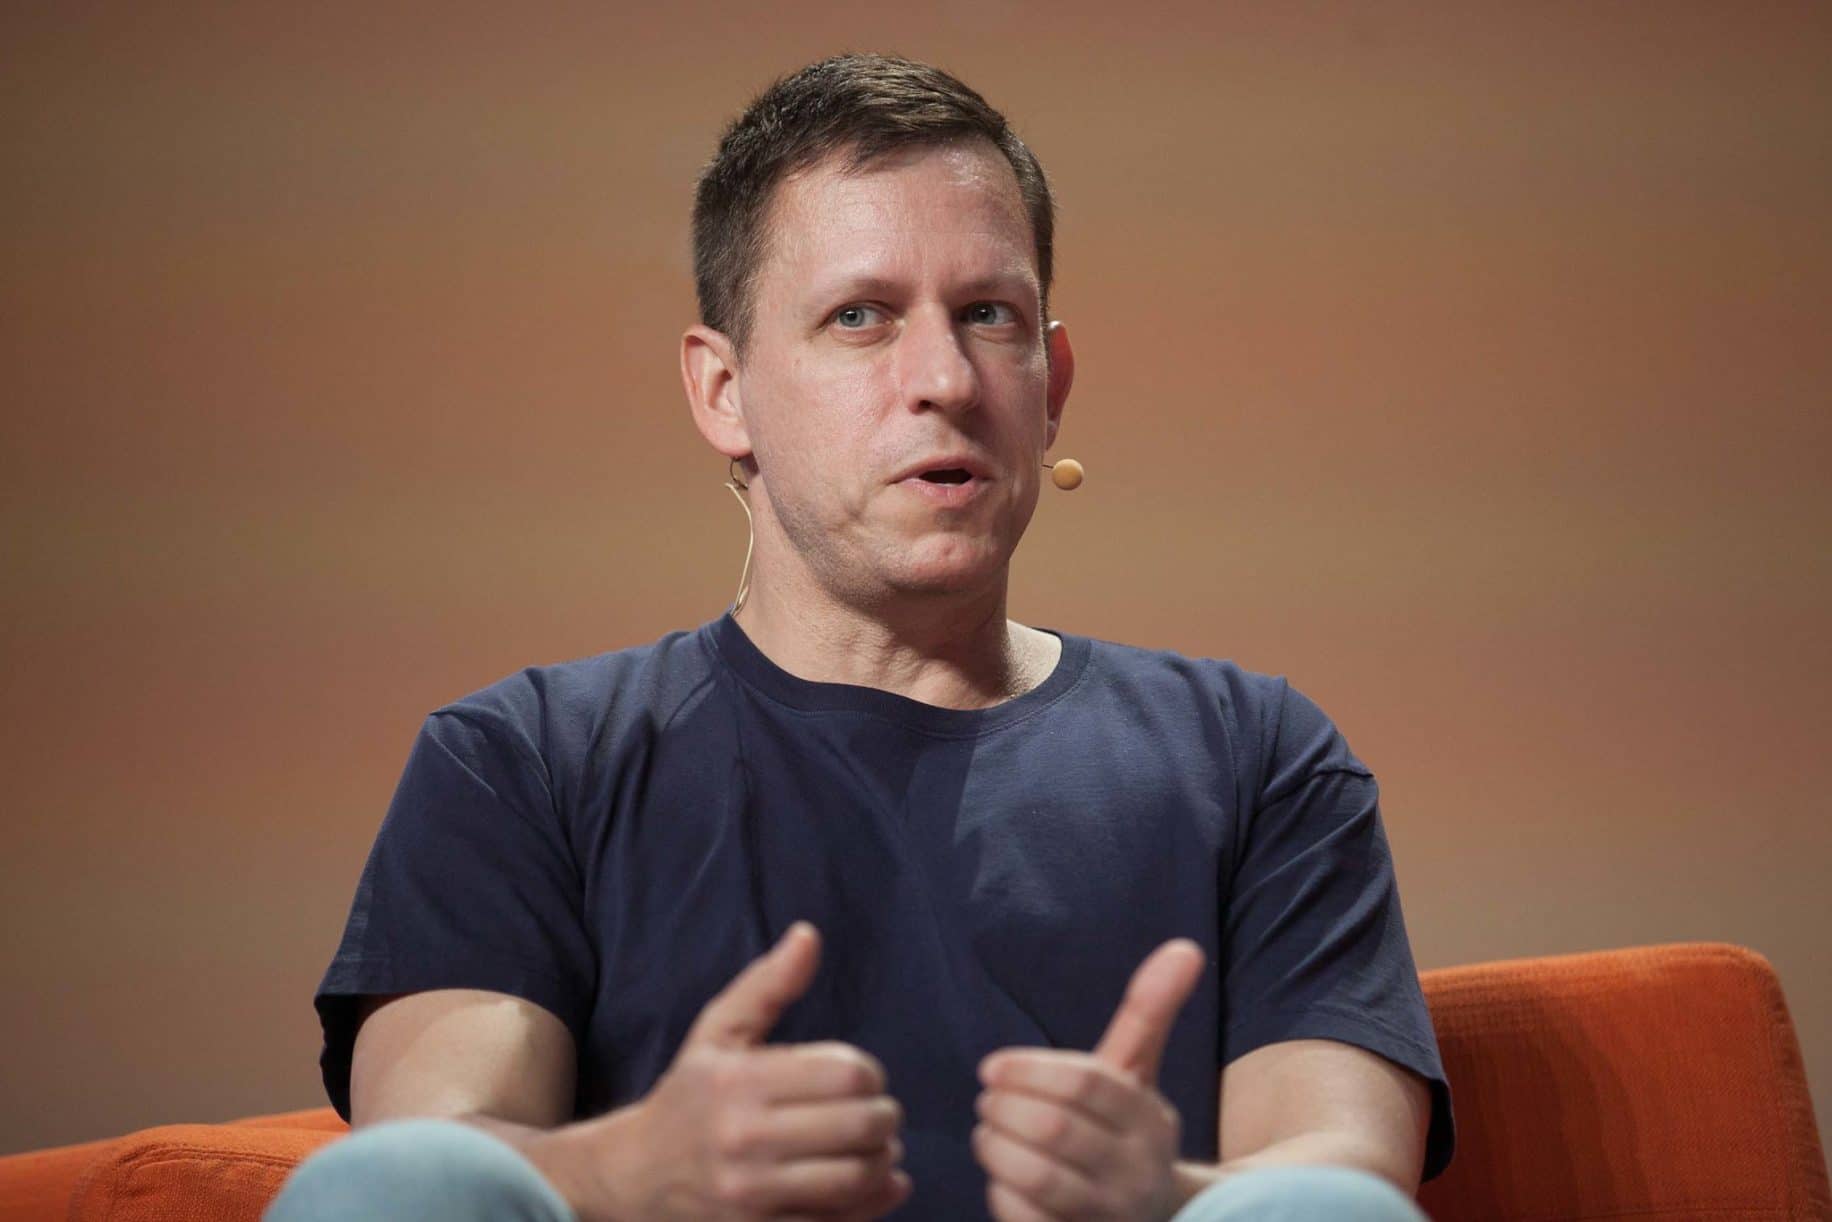 Billionaire Thiel: Google 'seemingly committing treason' with Chinese military; calls for federal investigation into spies and more